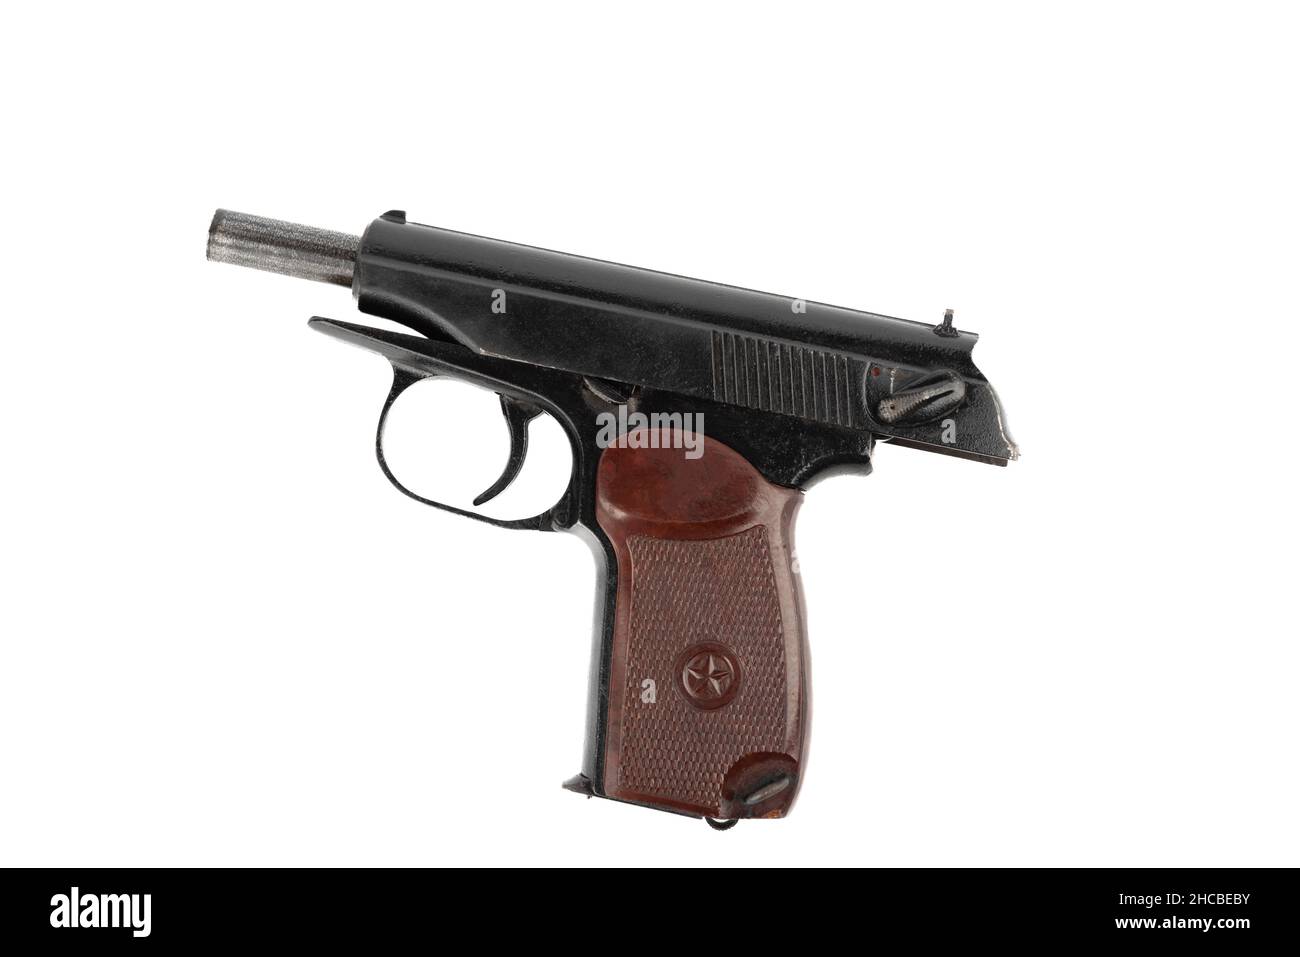 Close-up on a Makarov pistol with the bolt stopped in the open position against a white background. The pistol bolt is stopped. Stock Photo